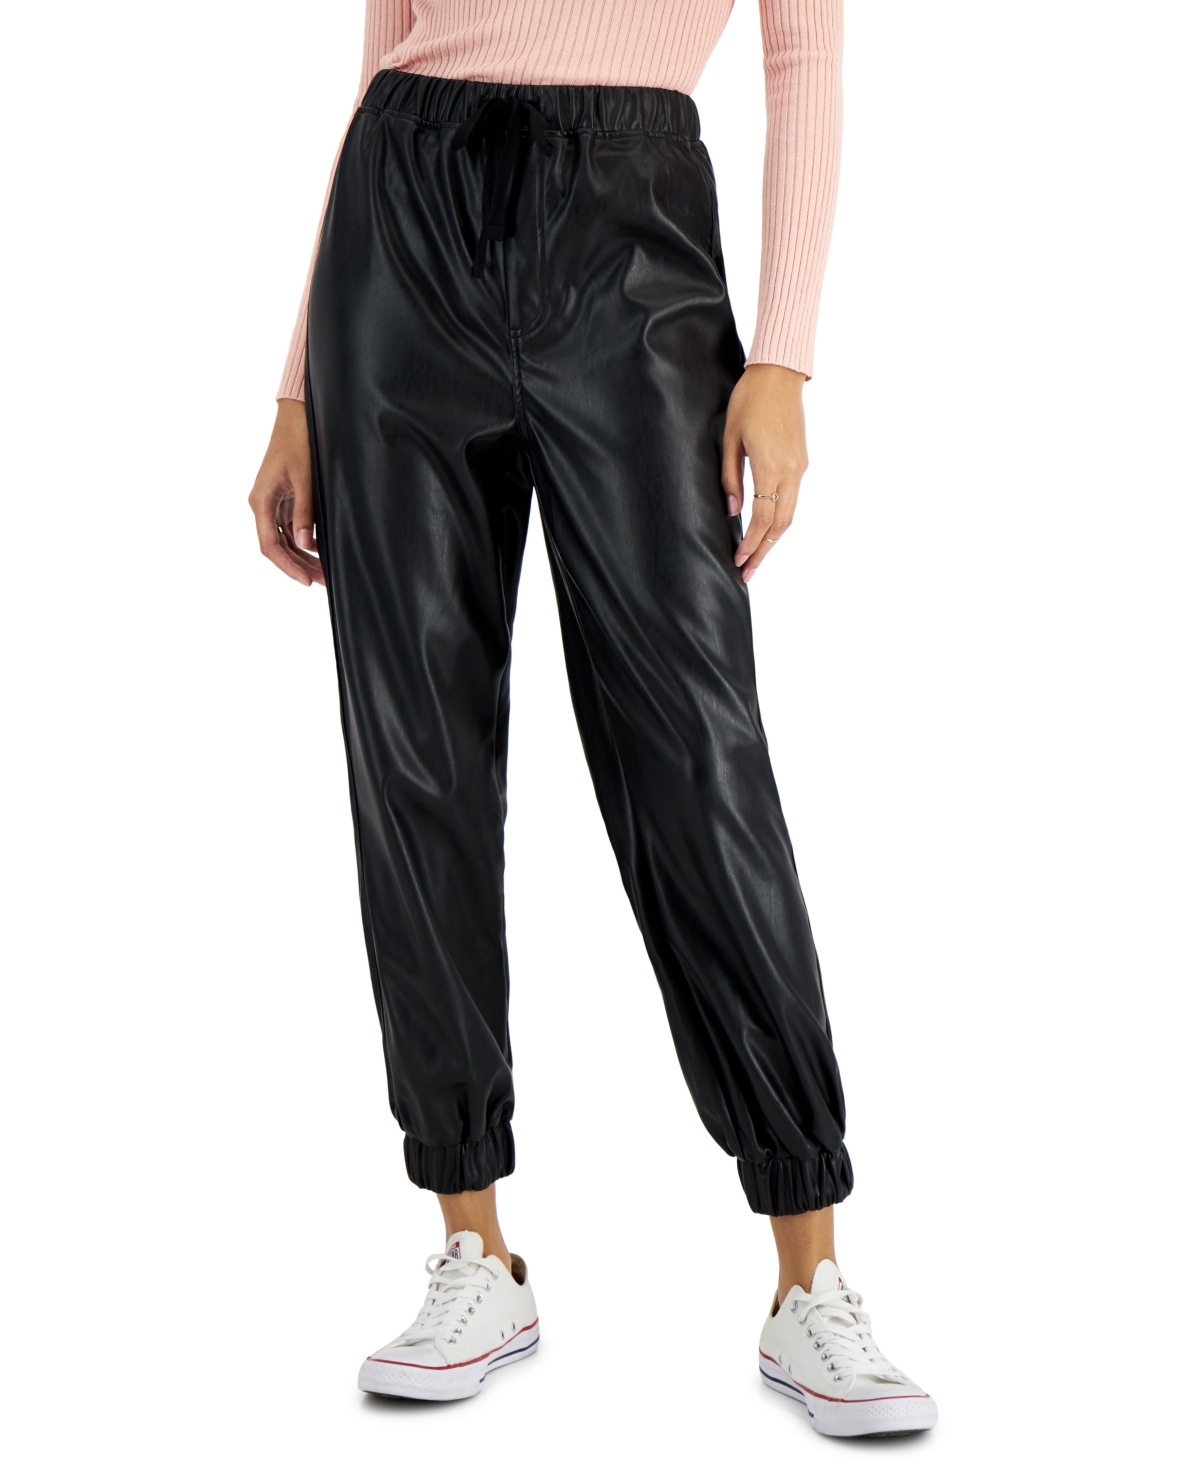 Juniors' Faux-Leather Jogger Pants, Created for Macy's - Black